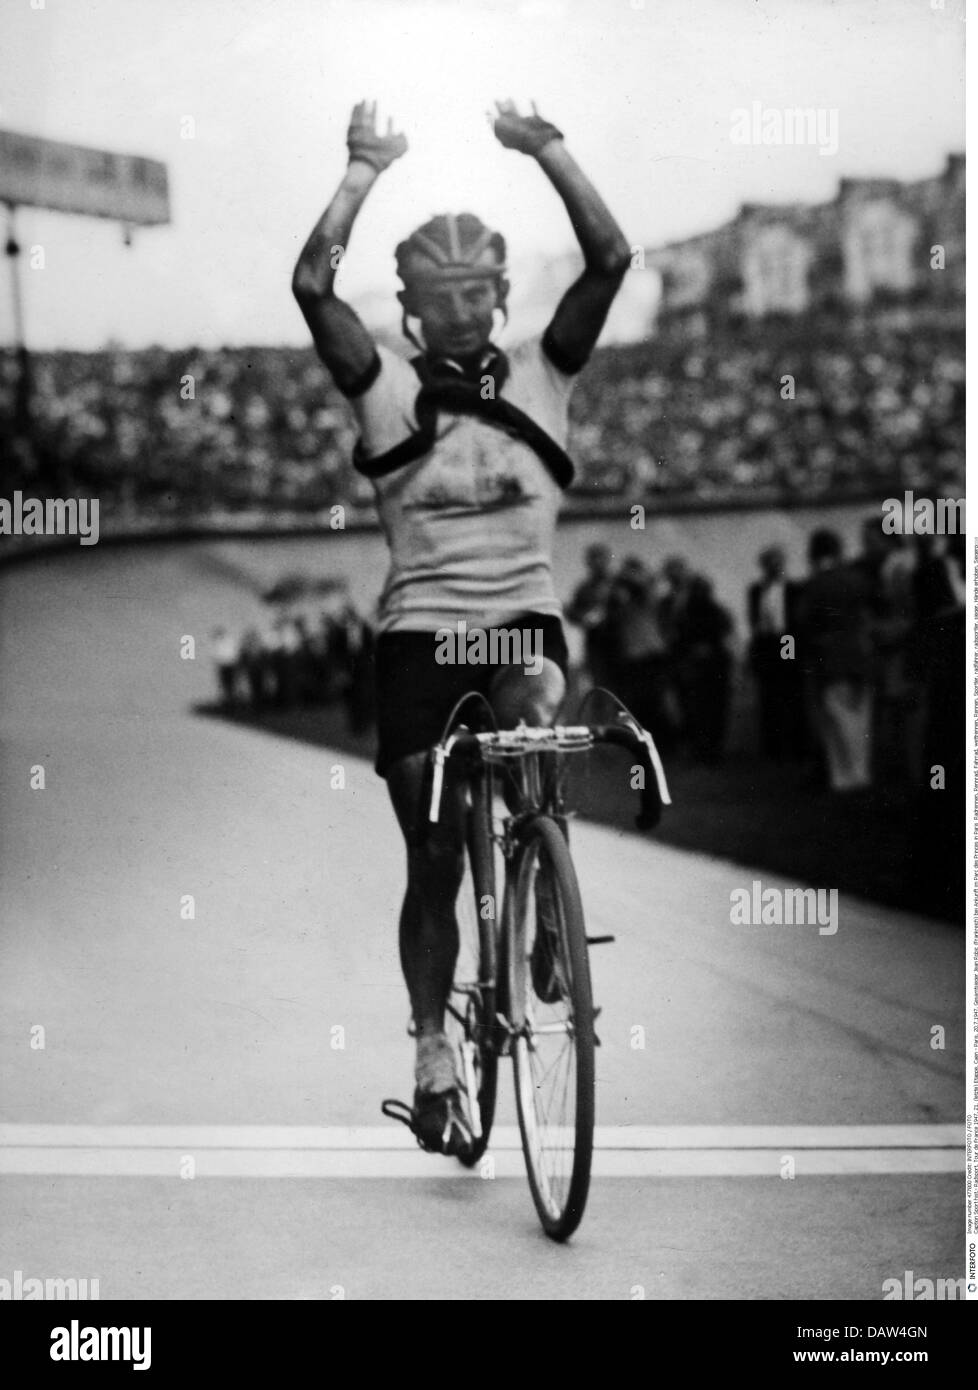 sports, cycling, Tour de France, 1947, 21th stage, Caen - Paris, 20.7.1947, complete winner Jean Robic (France), arriving at Parc des Princes, Paris, 1940s, 40s, 20th century, historic, historical, cycle race, cycle races, racing cycle, racer, road bike, racing cycles, racers, road bikes, athlete, sportsman, cyclist, bikerider, bicyclist, cyclists, bikeriders, bicyclists, winning, handsign, hands, rising, hand sign, gesture, gestures, gesticulation, body language, arms, finish, cross the finishing line, people, Additional-Rights-Clearences-Not Available Stock Photo